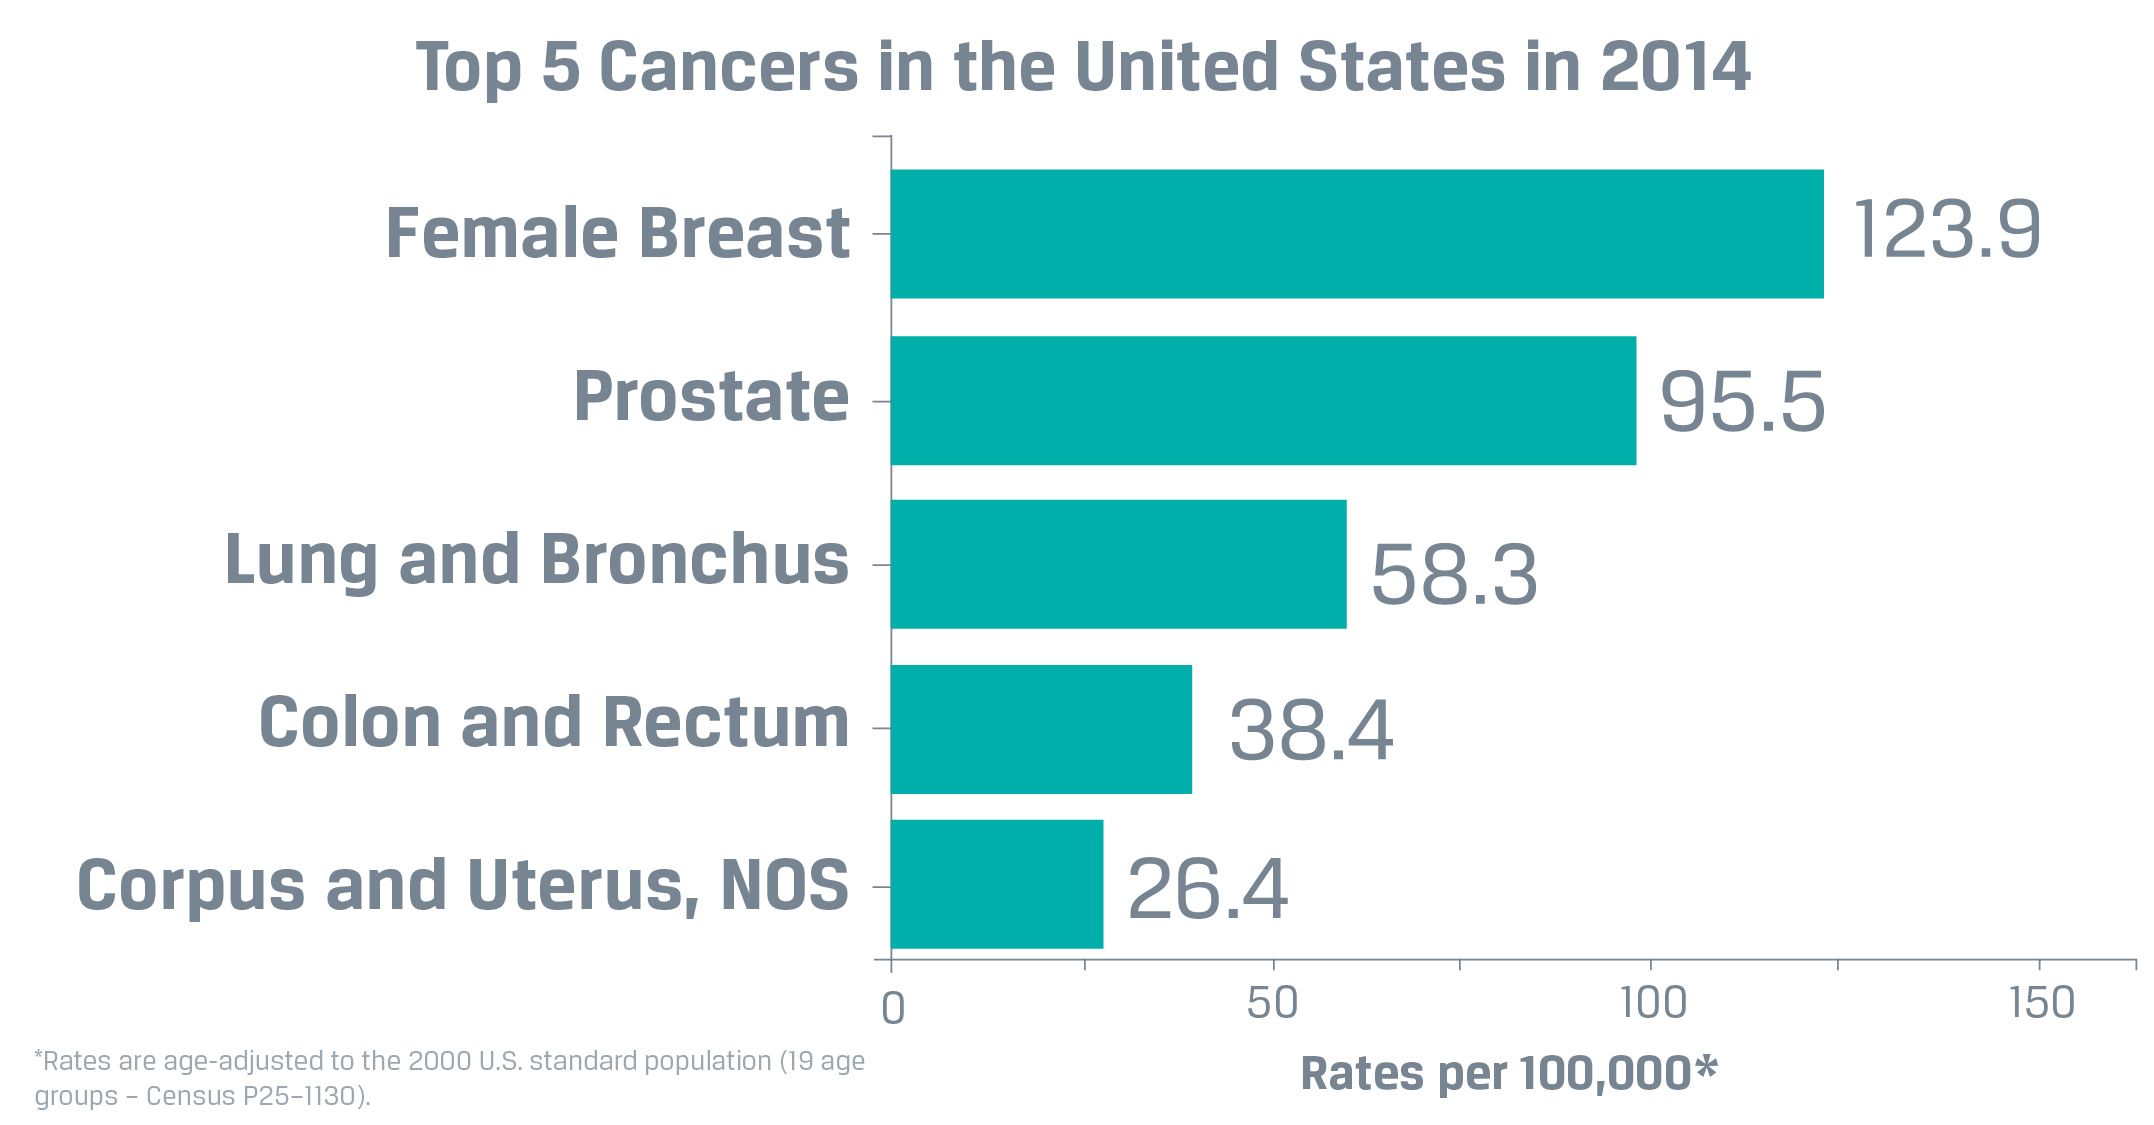 Top 5 Cancers int he US in 2014